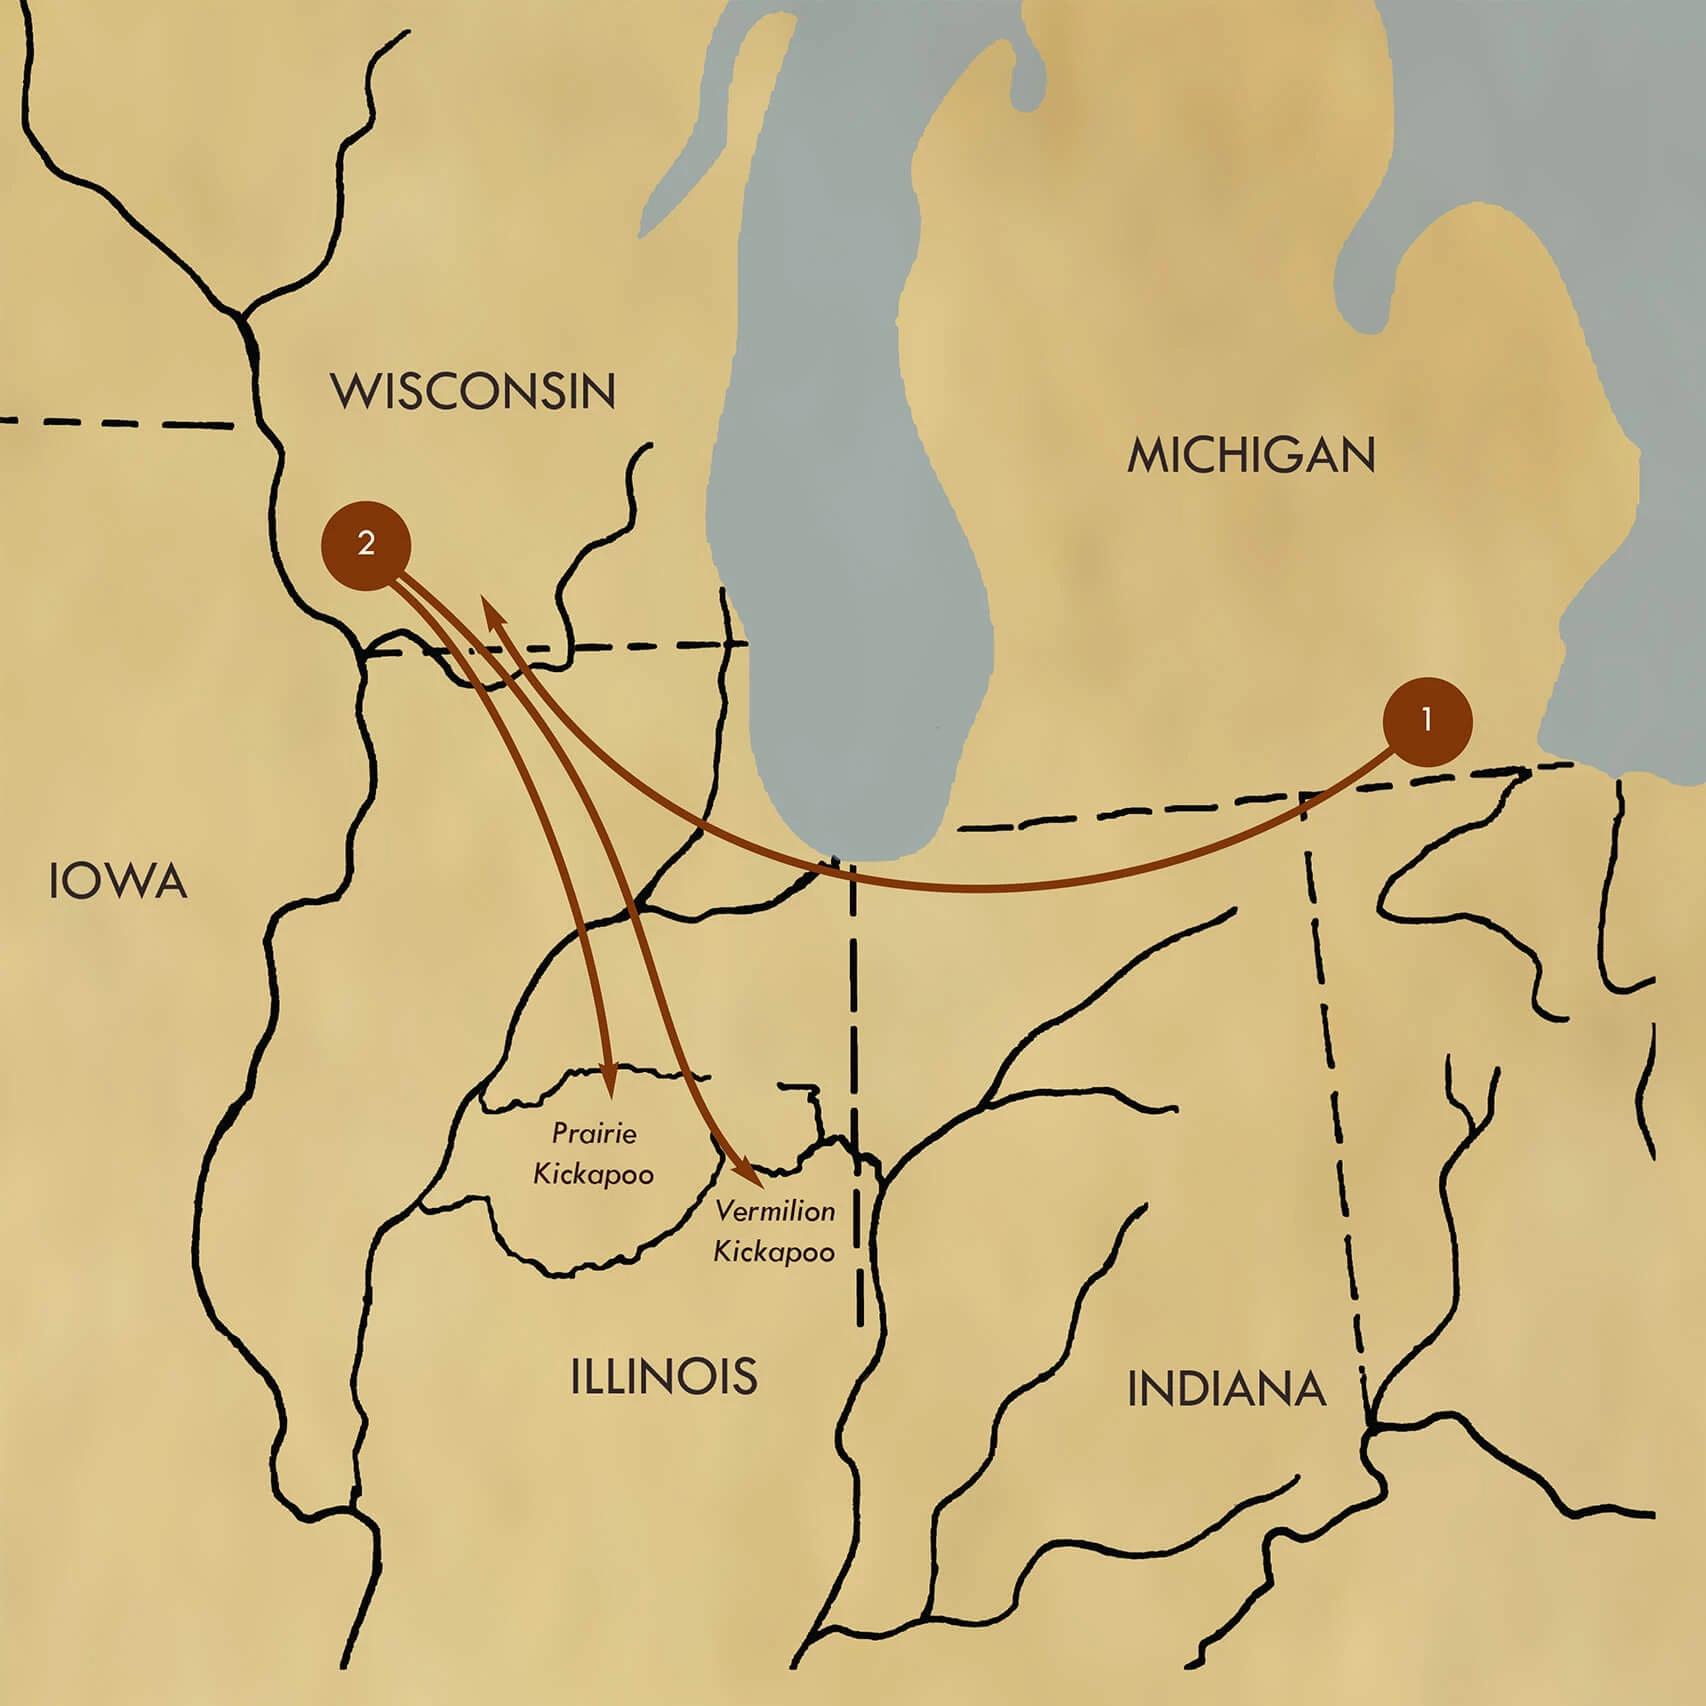 Map with arrows showing the migration of the Kickapoo from what is now Michigan, to Wisconsin, and two arrows into central Illinois.